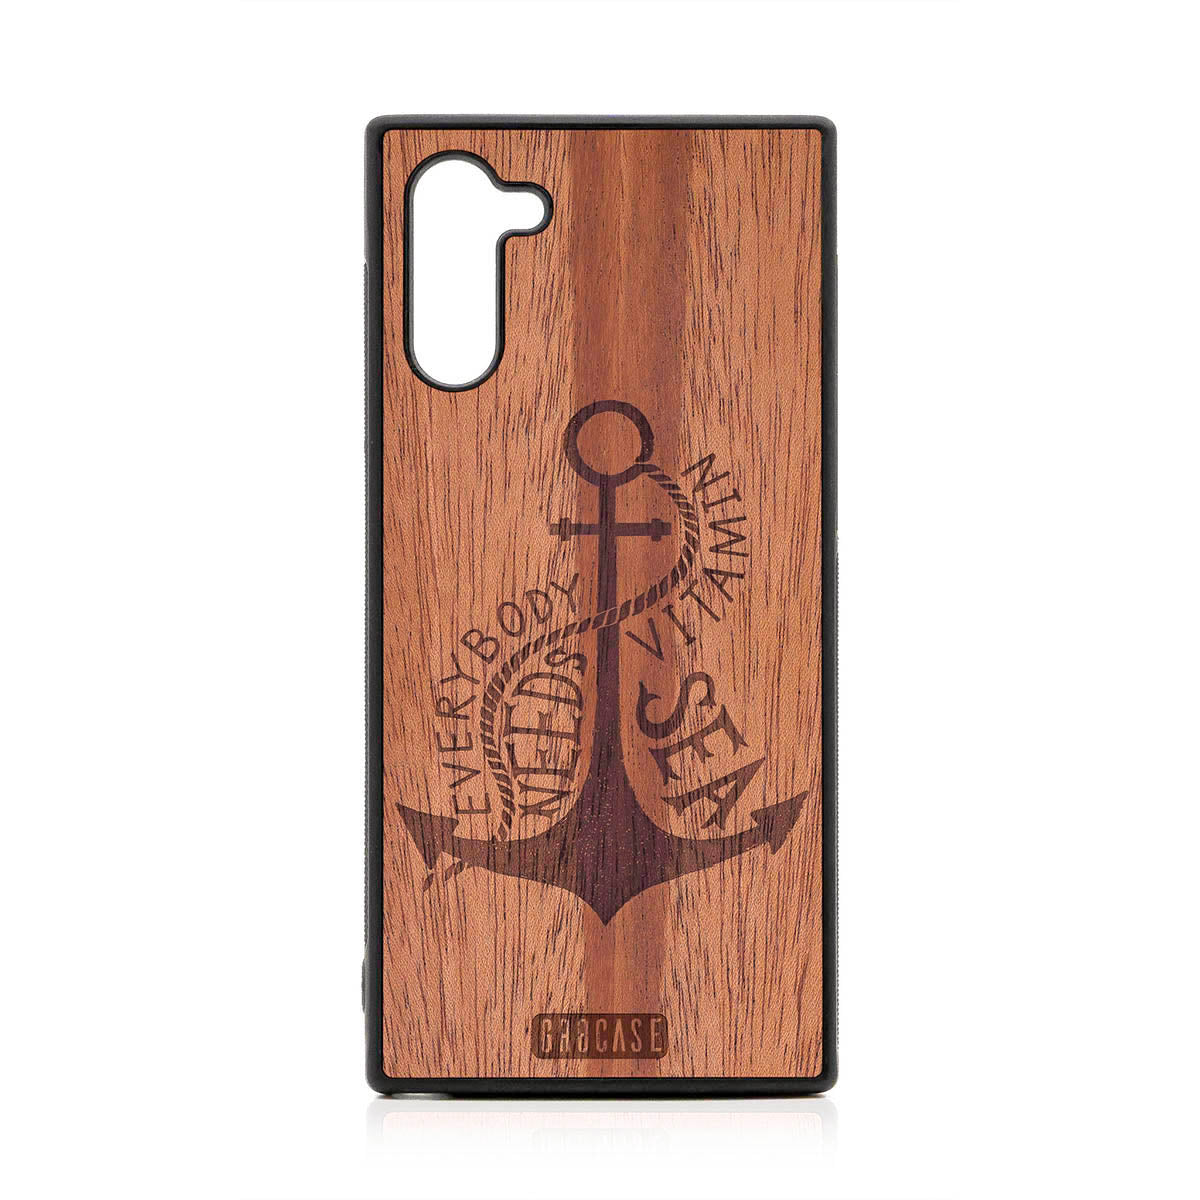 Everybody Needs Vitamin Sea (Anchor) Design Wood Case For Samsung Galaxy Note 10 by GR8CASE